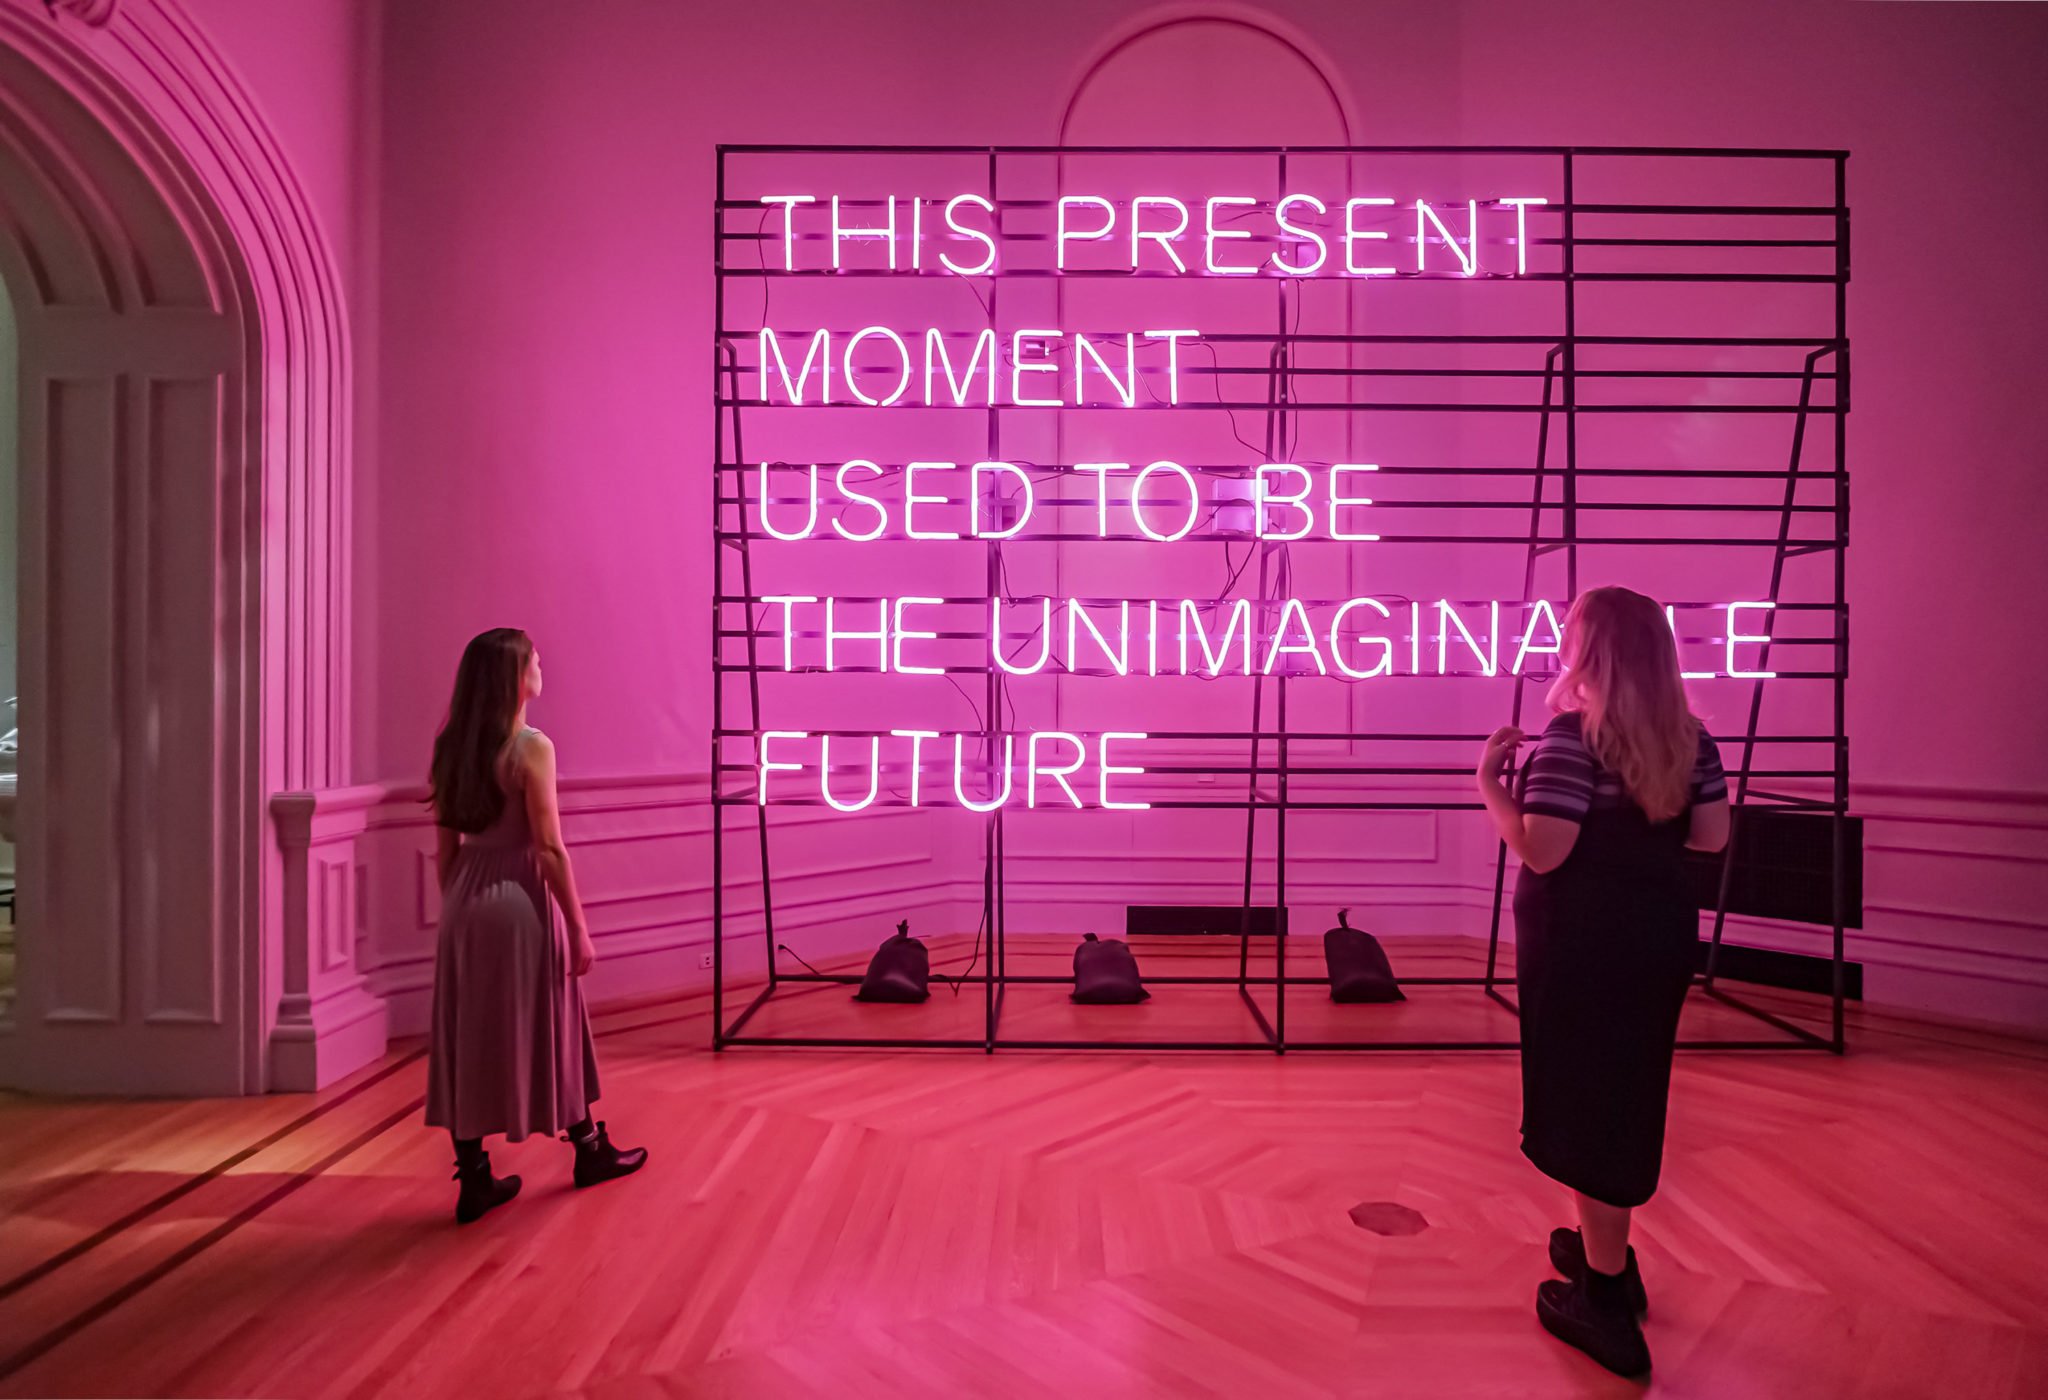 Alicia Eggert's neon artwork "This Present Moment" (2019-2020) on view at the Renwick Gallery.